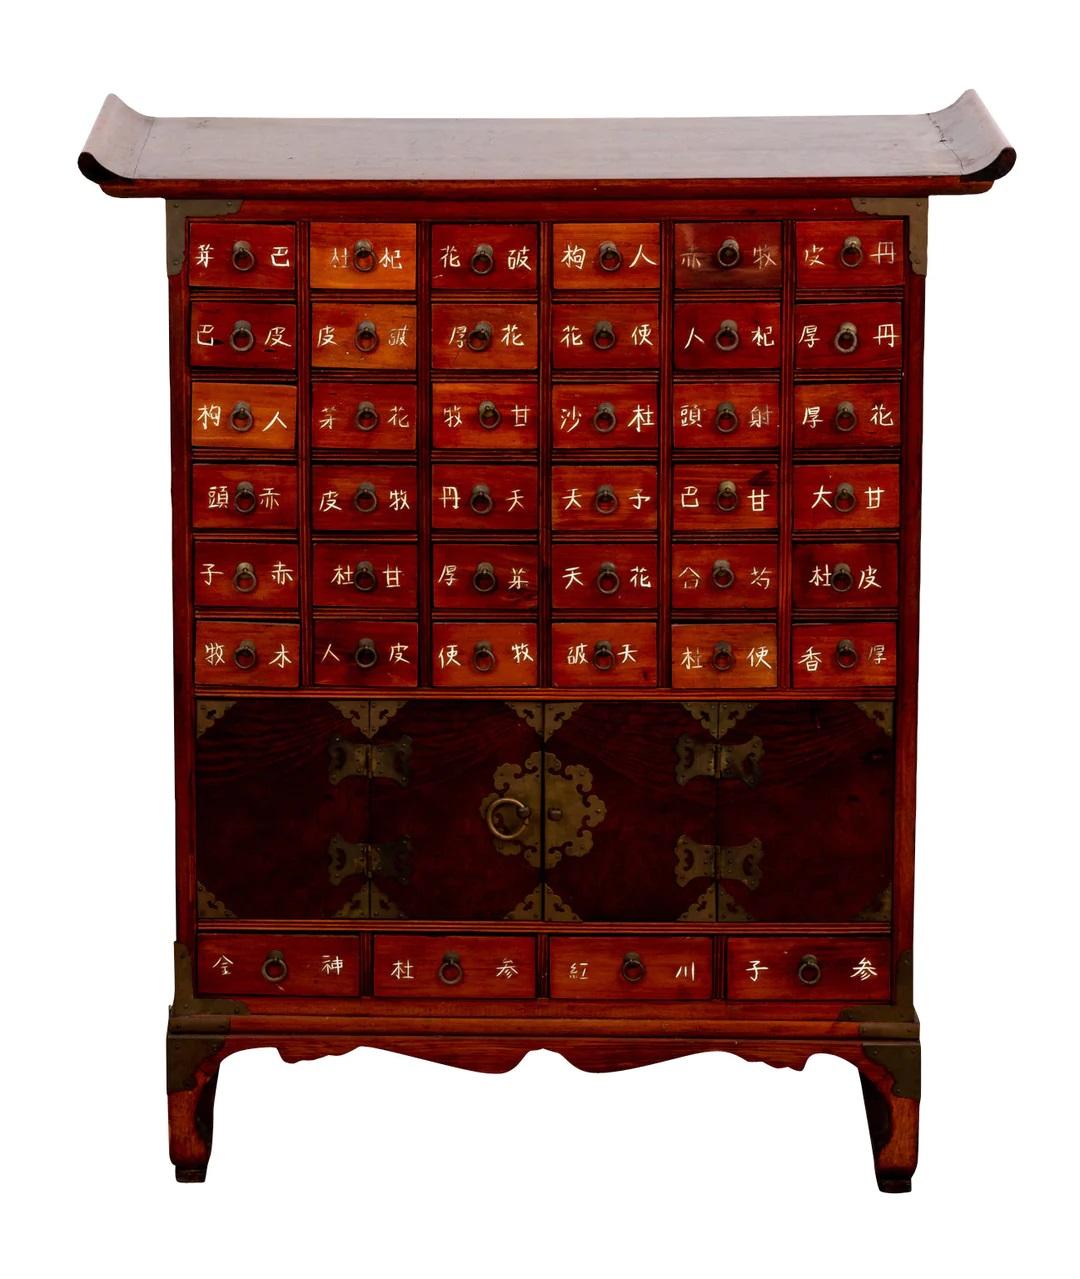 20th Century Chinese Apothecary Cabinet with 40 Drawers